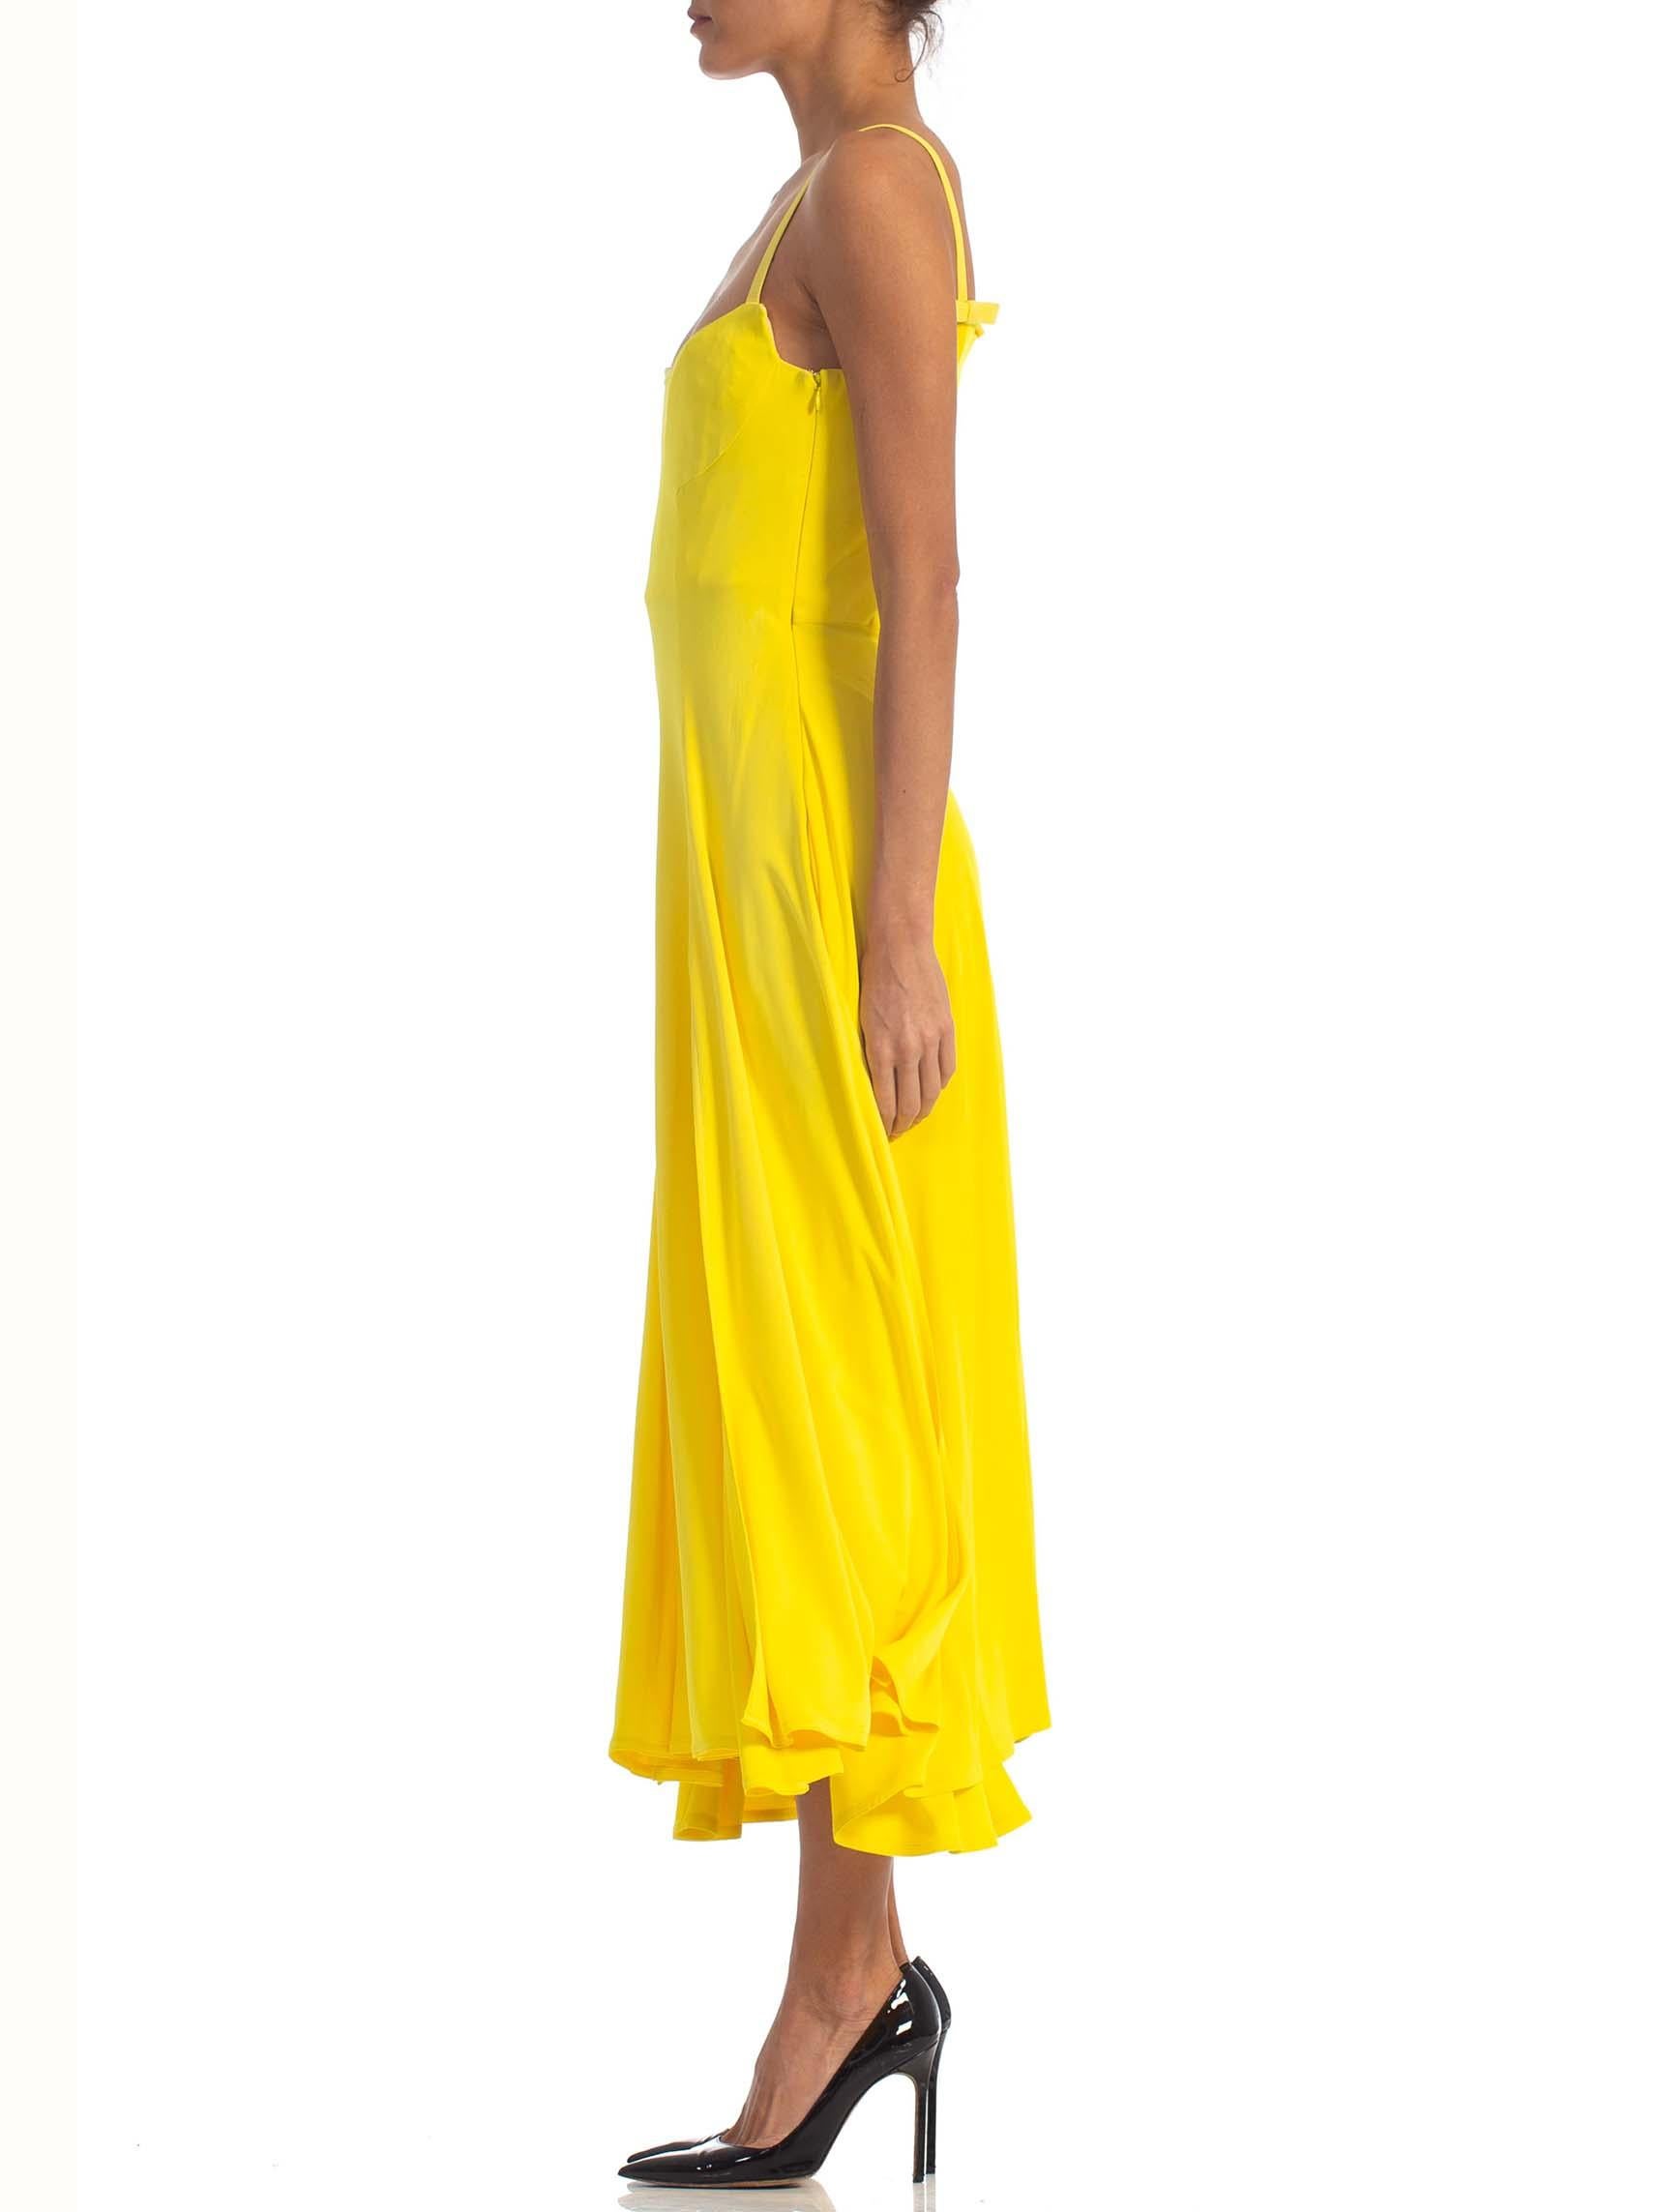 Women's 1990S GIANNI VERSACE Yellow Poly Blend Stretch Gown With High Slits And Matchin For Sale